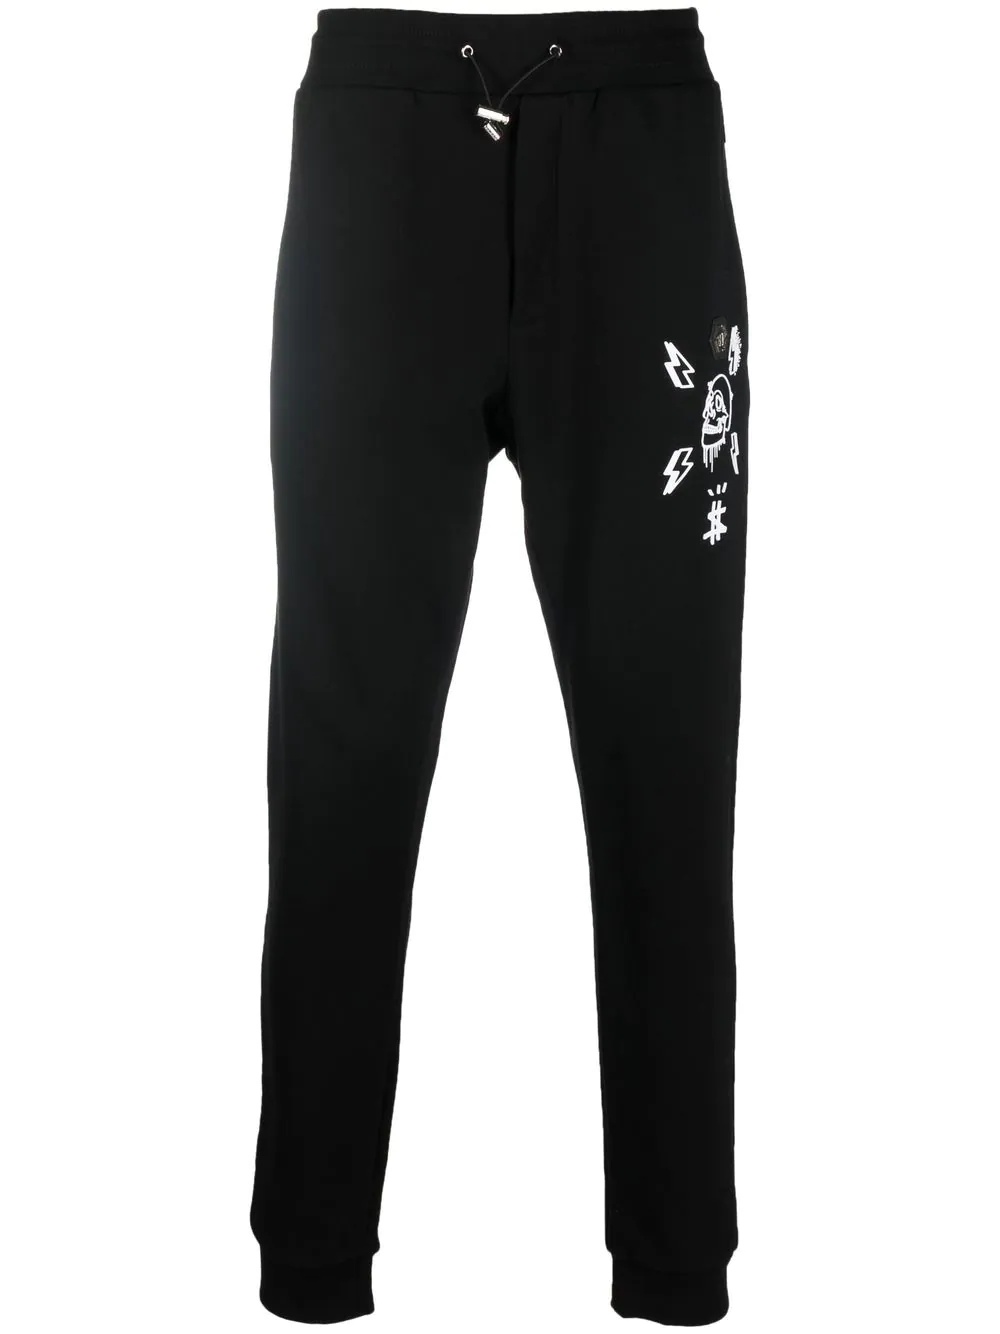 Hexagon tapered track pants - 1